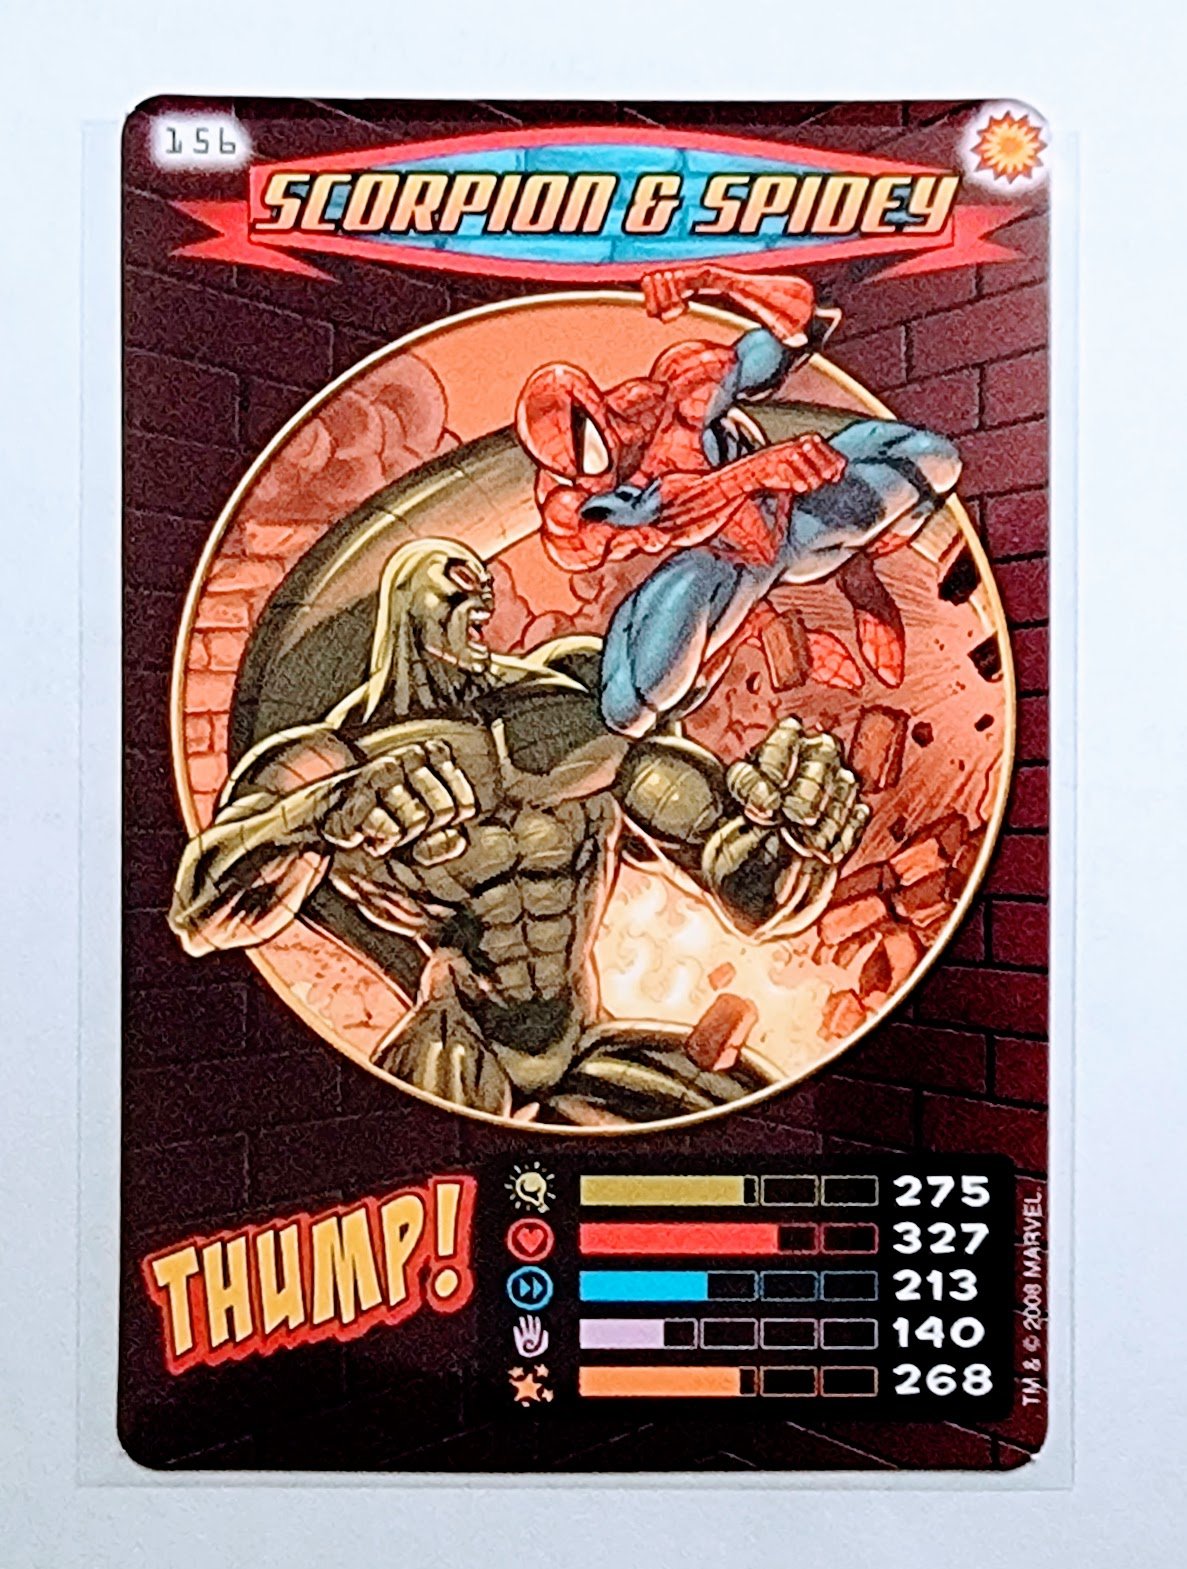 2008 Spiderman Heroes and Villains Scorpion & Spidey #156 Marvel Booster Trading Card UPTI simple Xclusive Collectibles   